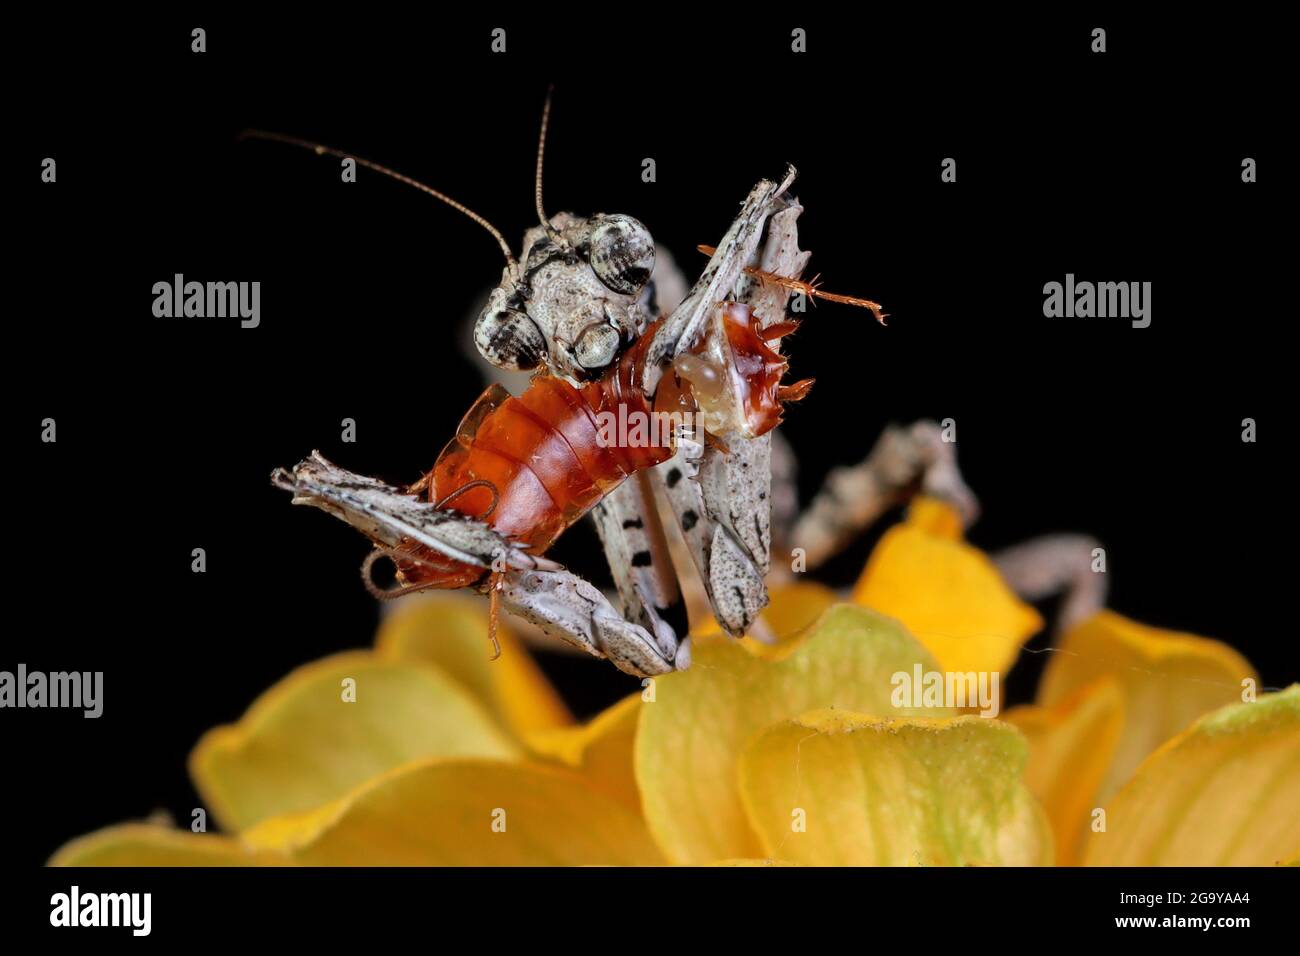 Close-Up of a Twig Mantis eating an insect on a flower, Indonesia Stock Photo